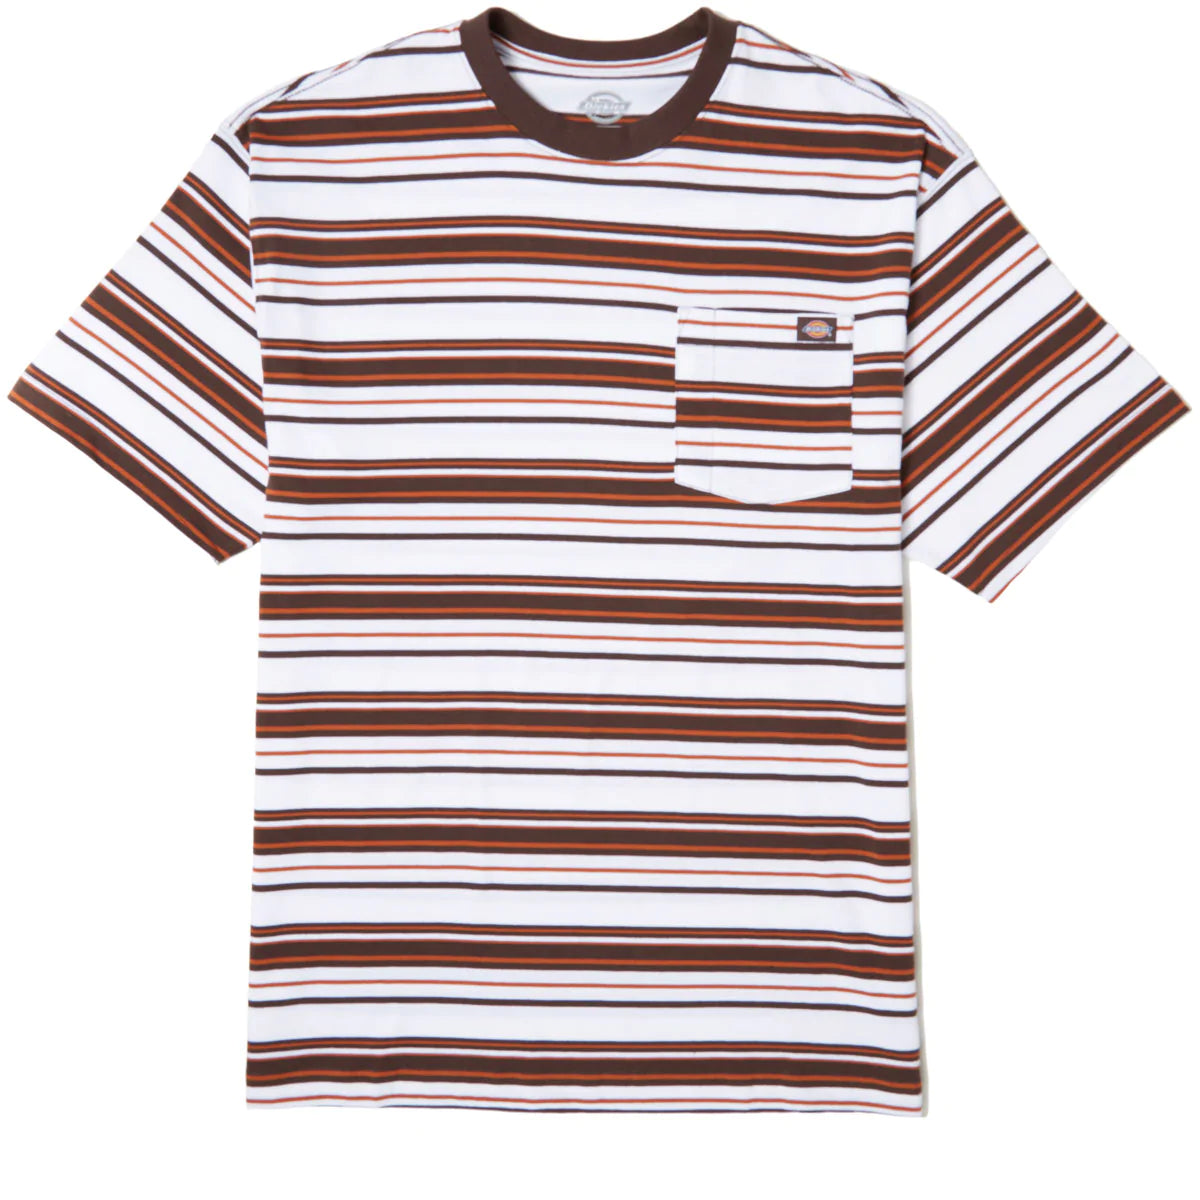 Dickies Relaxed Fit Striped Pocket T-Shirt